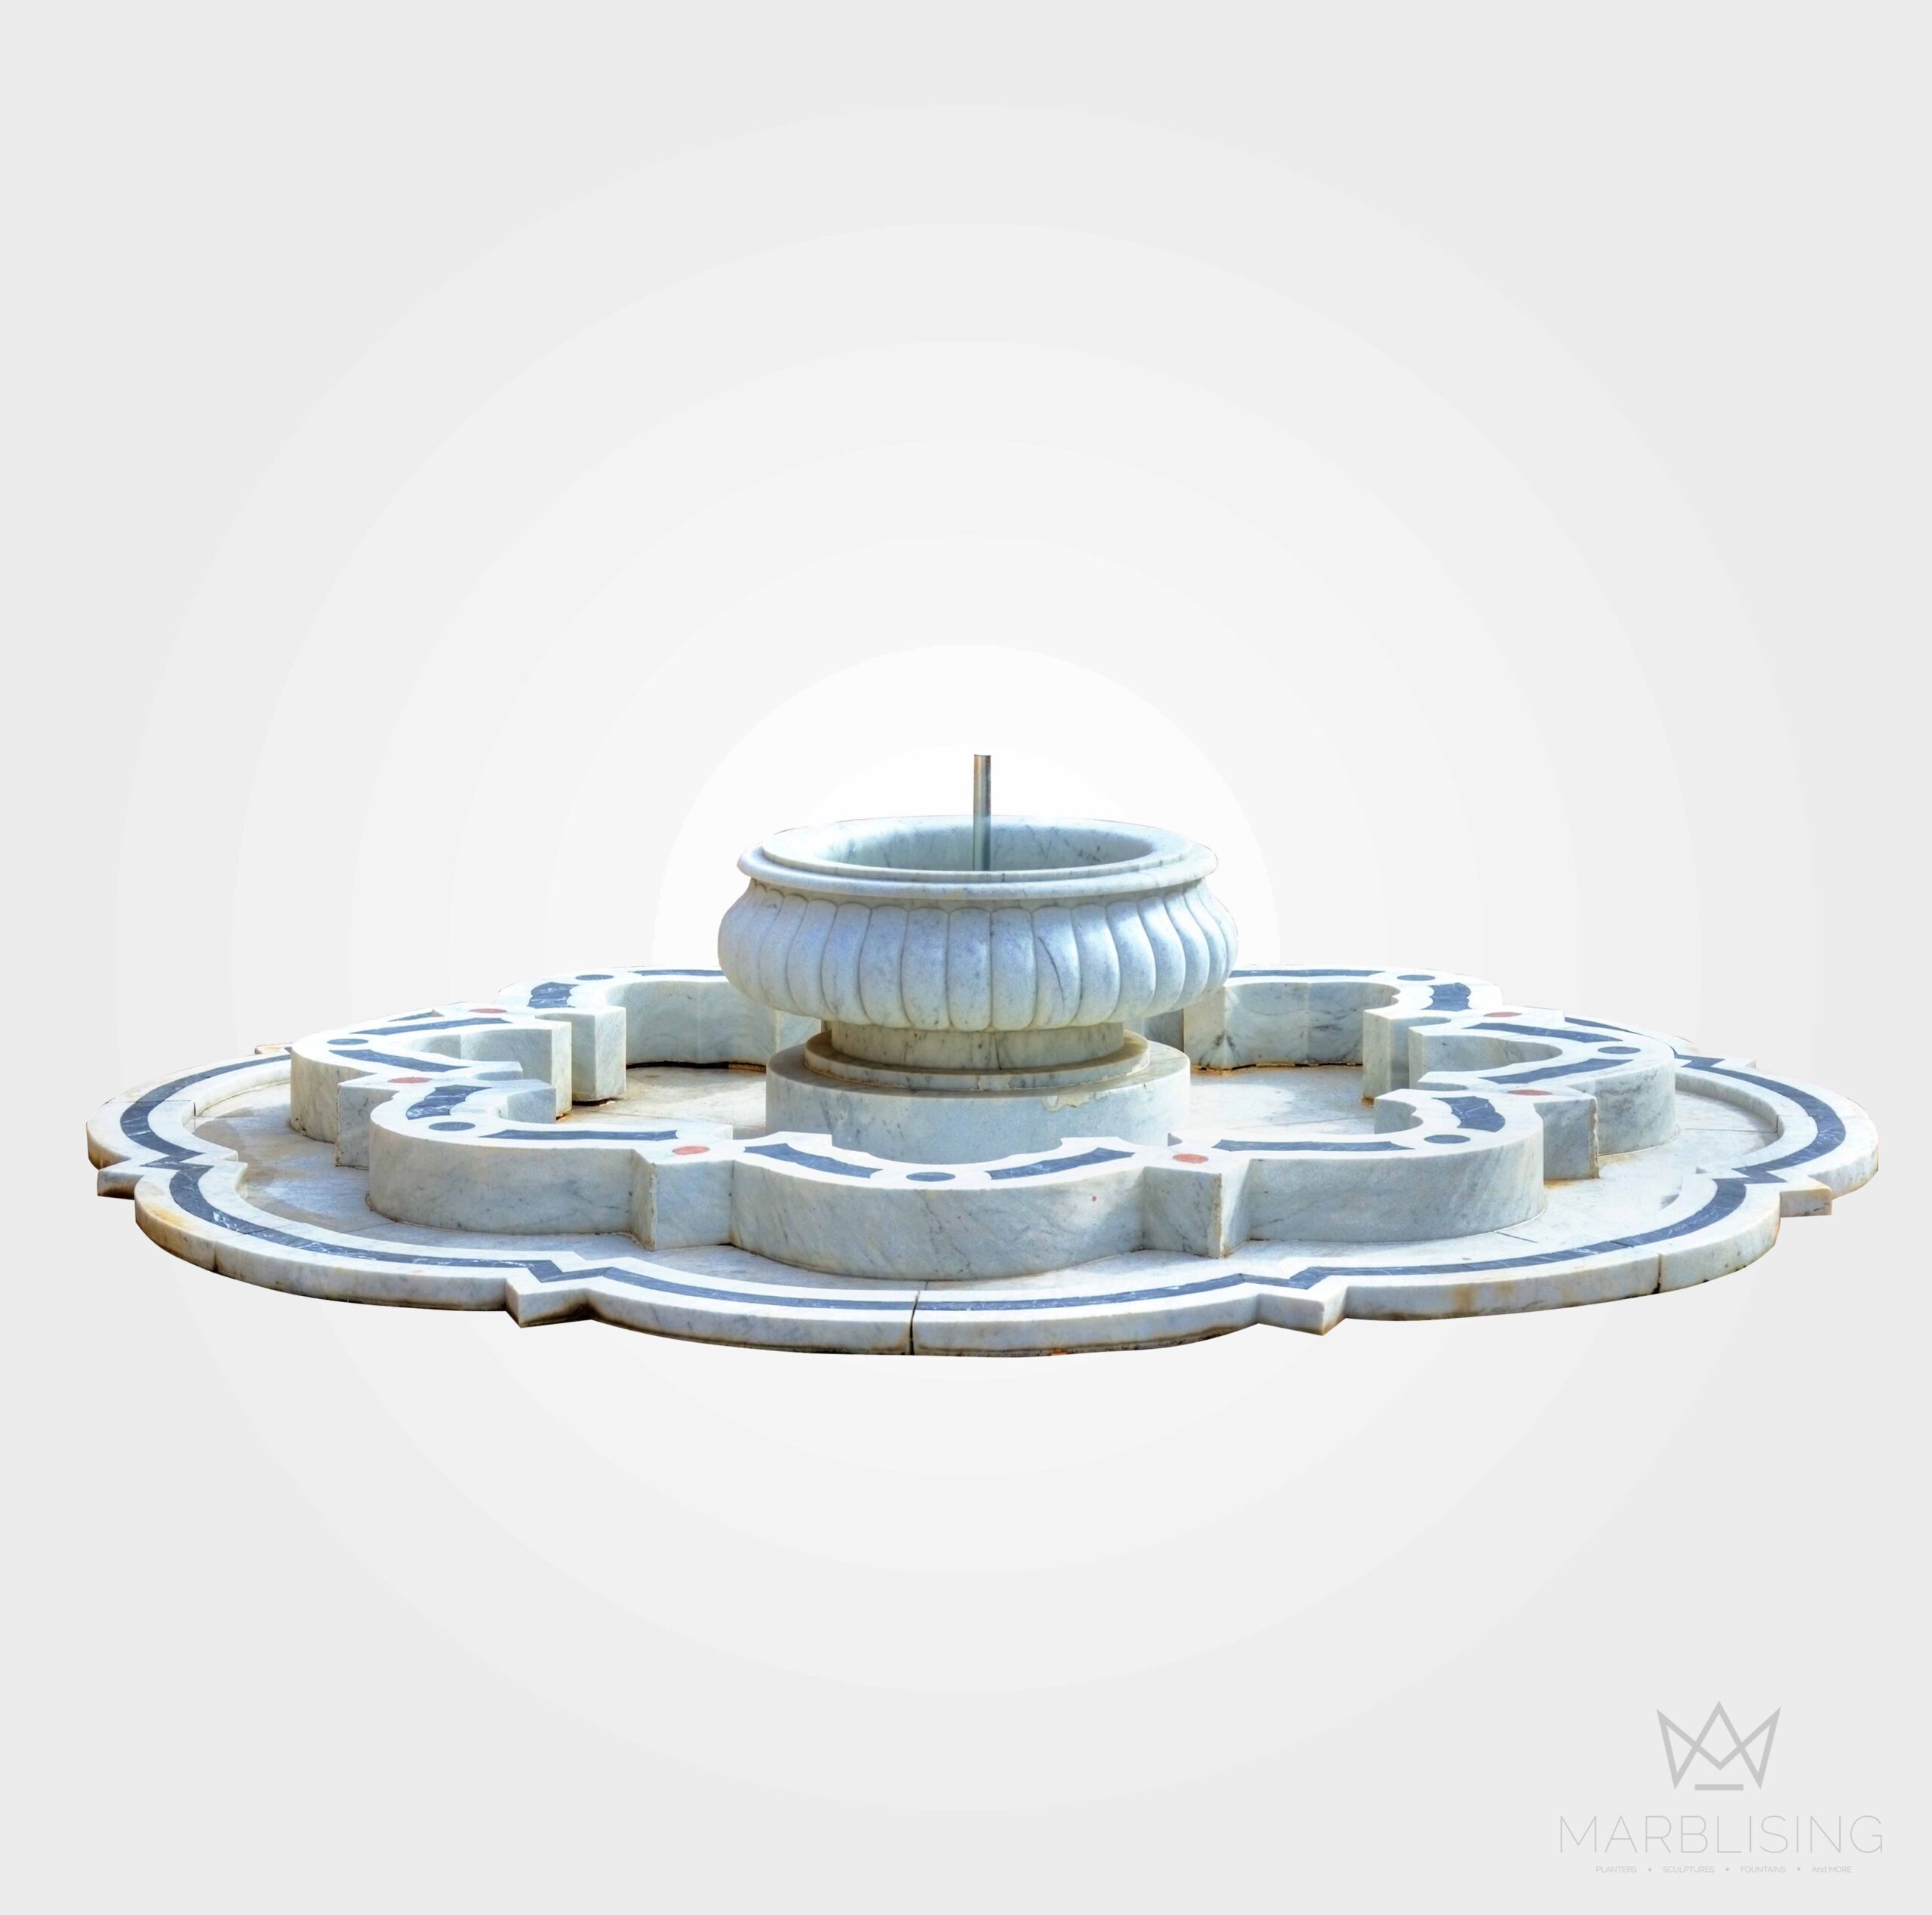 Moroccan Fountain with Stylized Pool Base